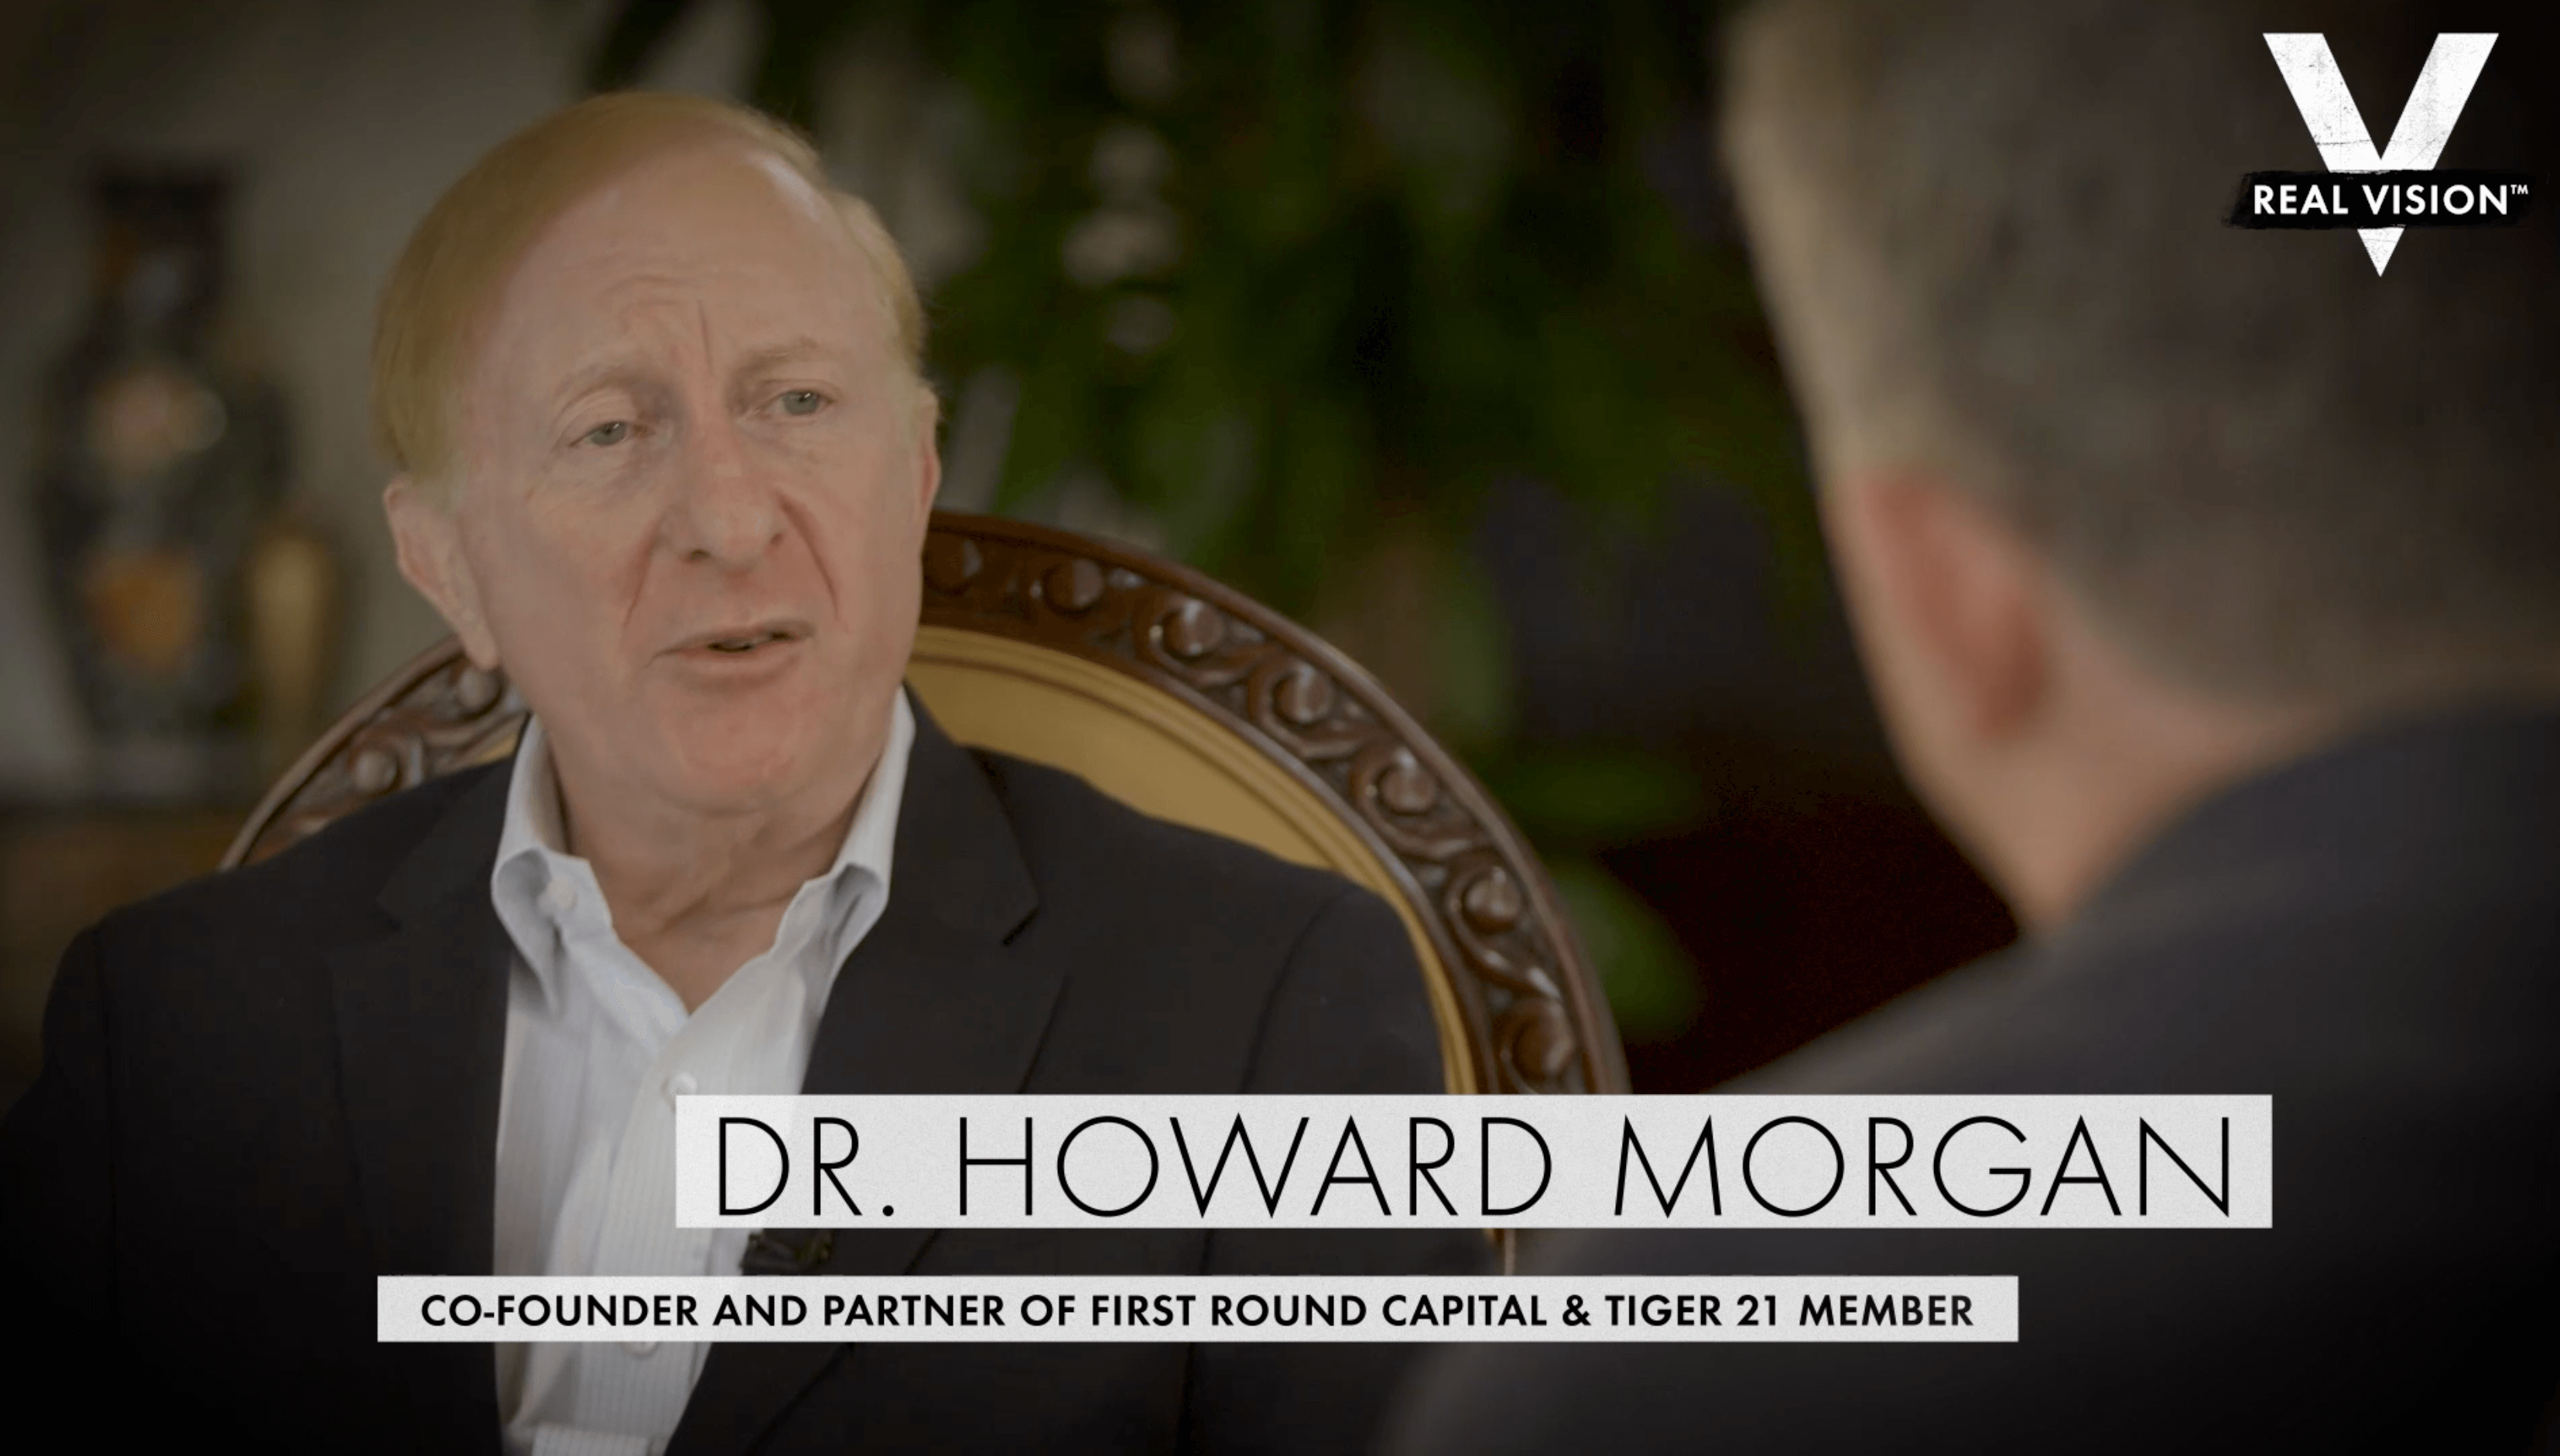 TIGER 21 MEMBER AND CO-FOUNDER OF FIRST ROUND CAPITAL, DR. HOWARD MORGAN, DISCUSSES STARTUP FAILURE AND SUCCESS